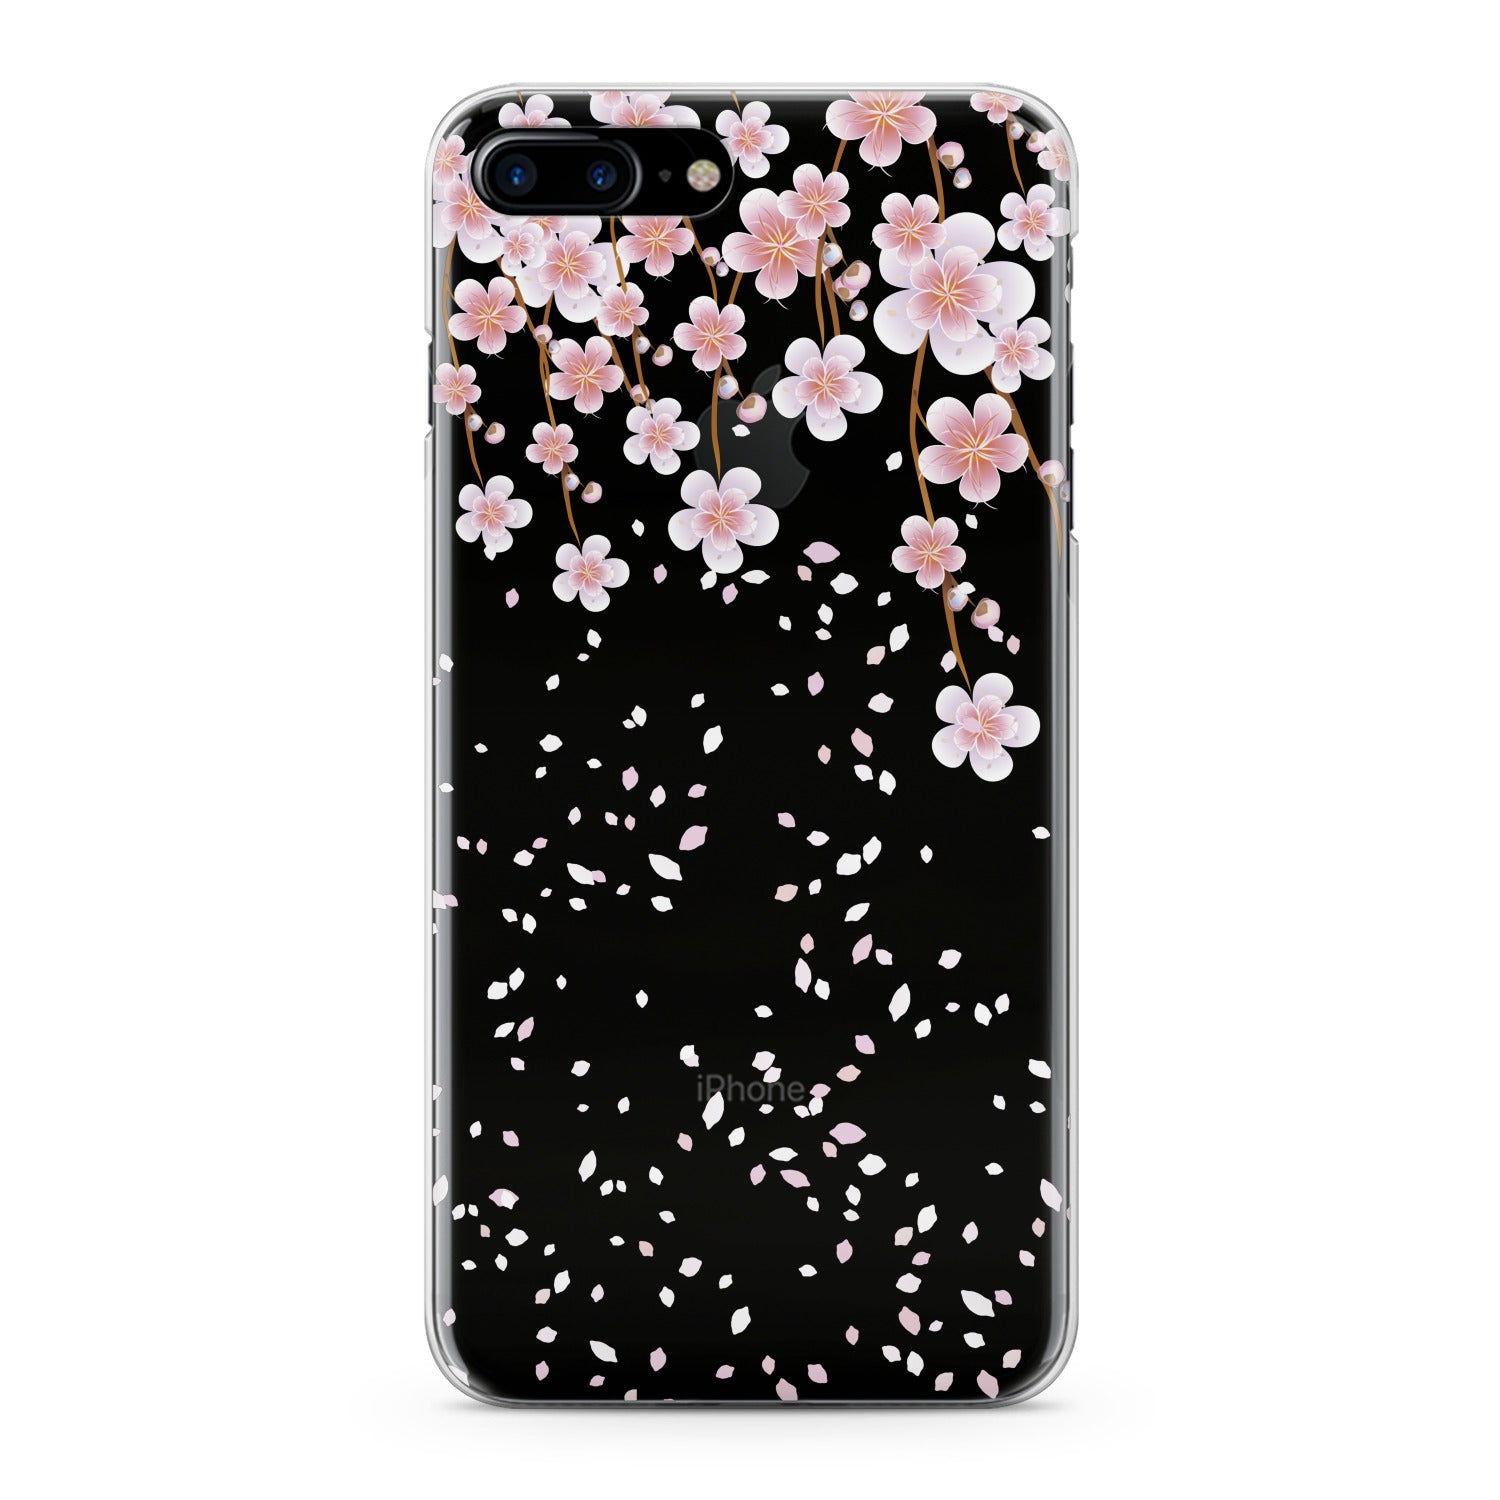 Lex Altern Gentle Pink Flowers Phone Case for your iPhone & Android phone.